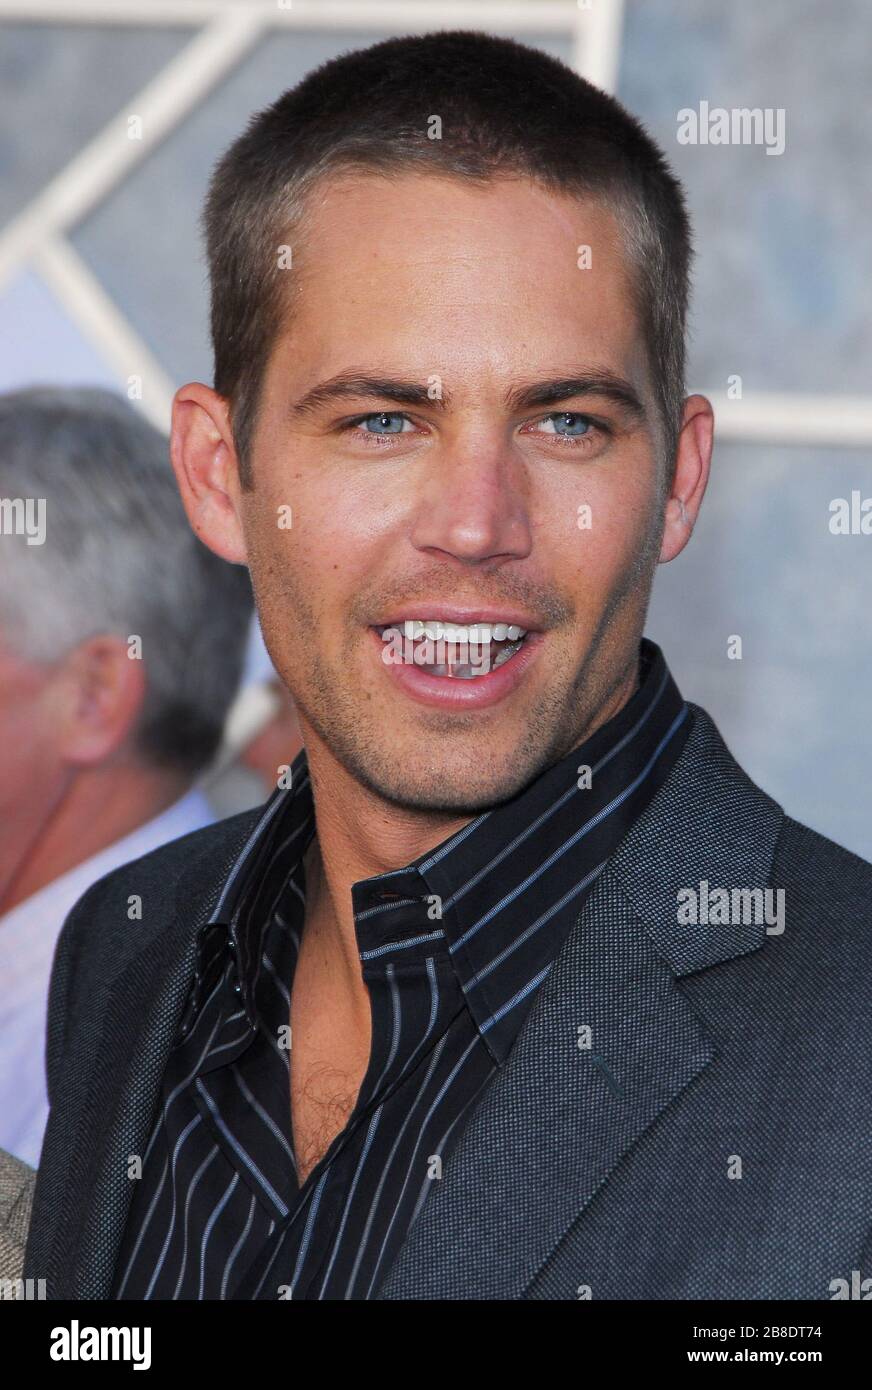 Paul Walker at the World Premiere of 'Eight Below' held at the El Capitan Theater in Hollywood, CA. The event took place on Sunday, February 12, 2006.  Photo by: SBM / PictureLux - File Reference # 33984-10601SBMPLX Stock Photo